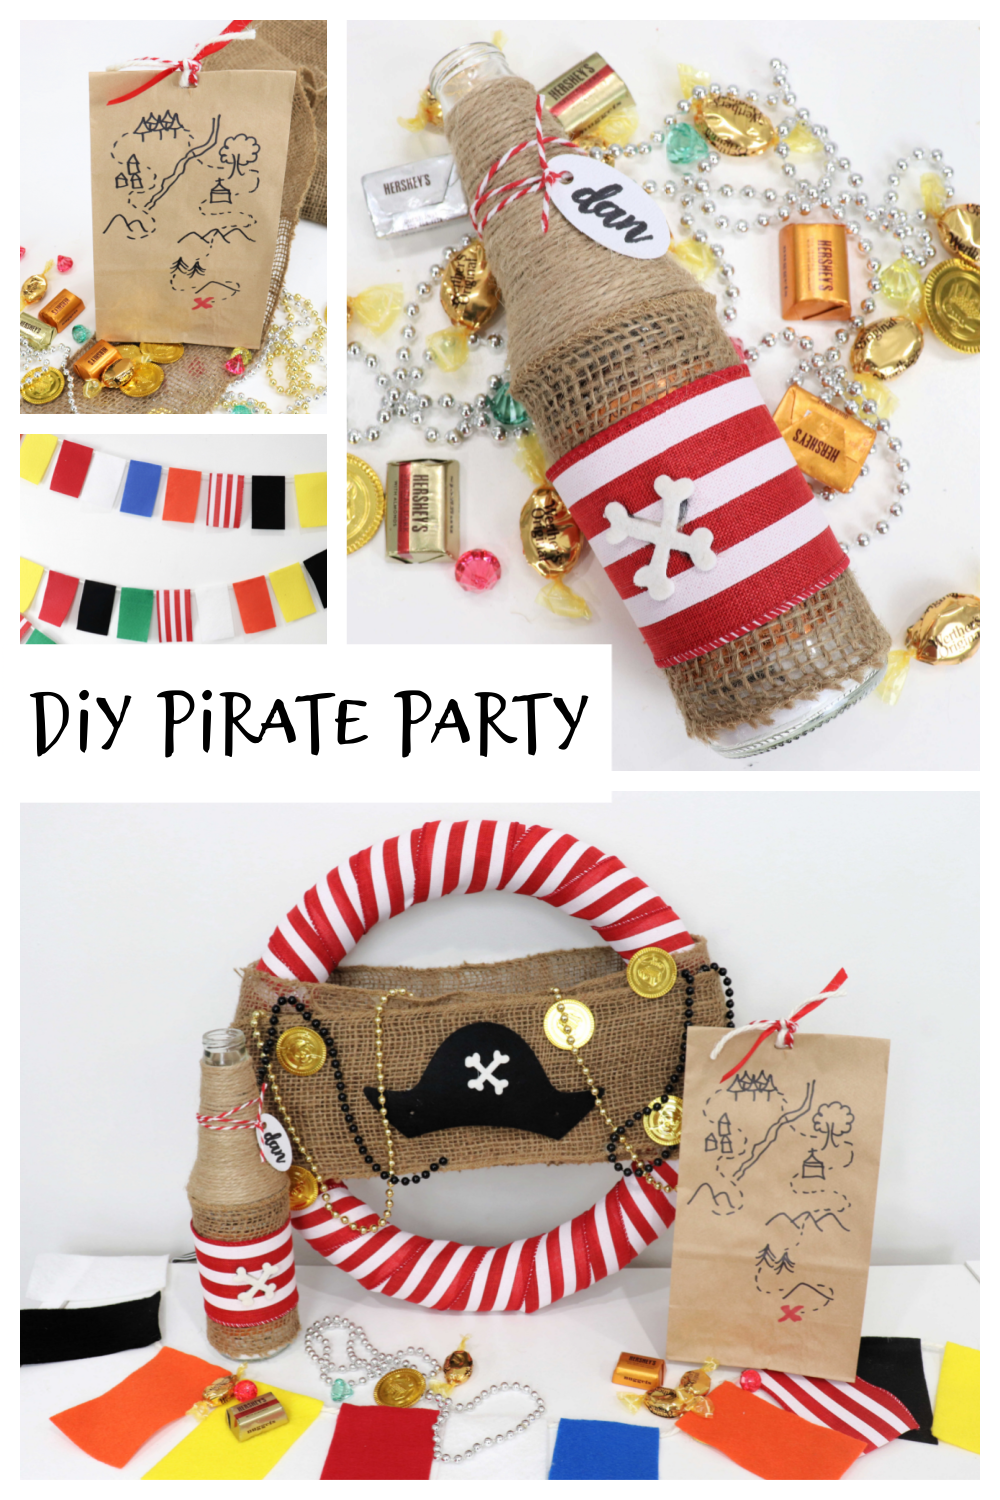 This image is a collage of pirate themed party ideas.